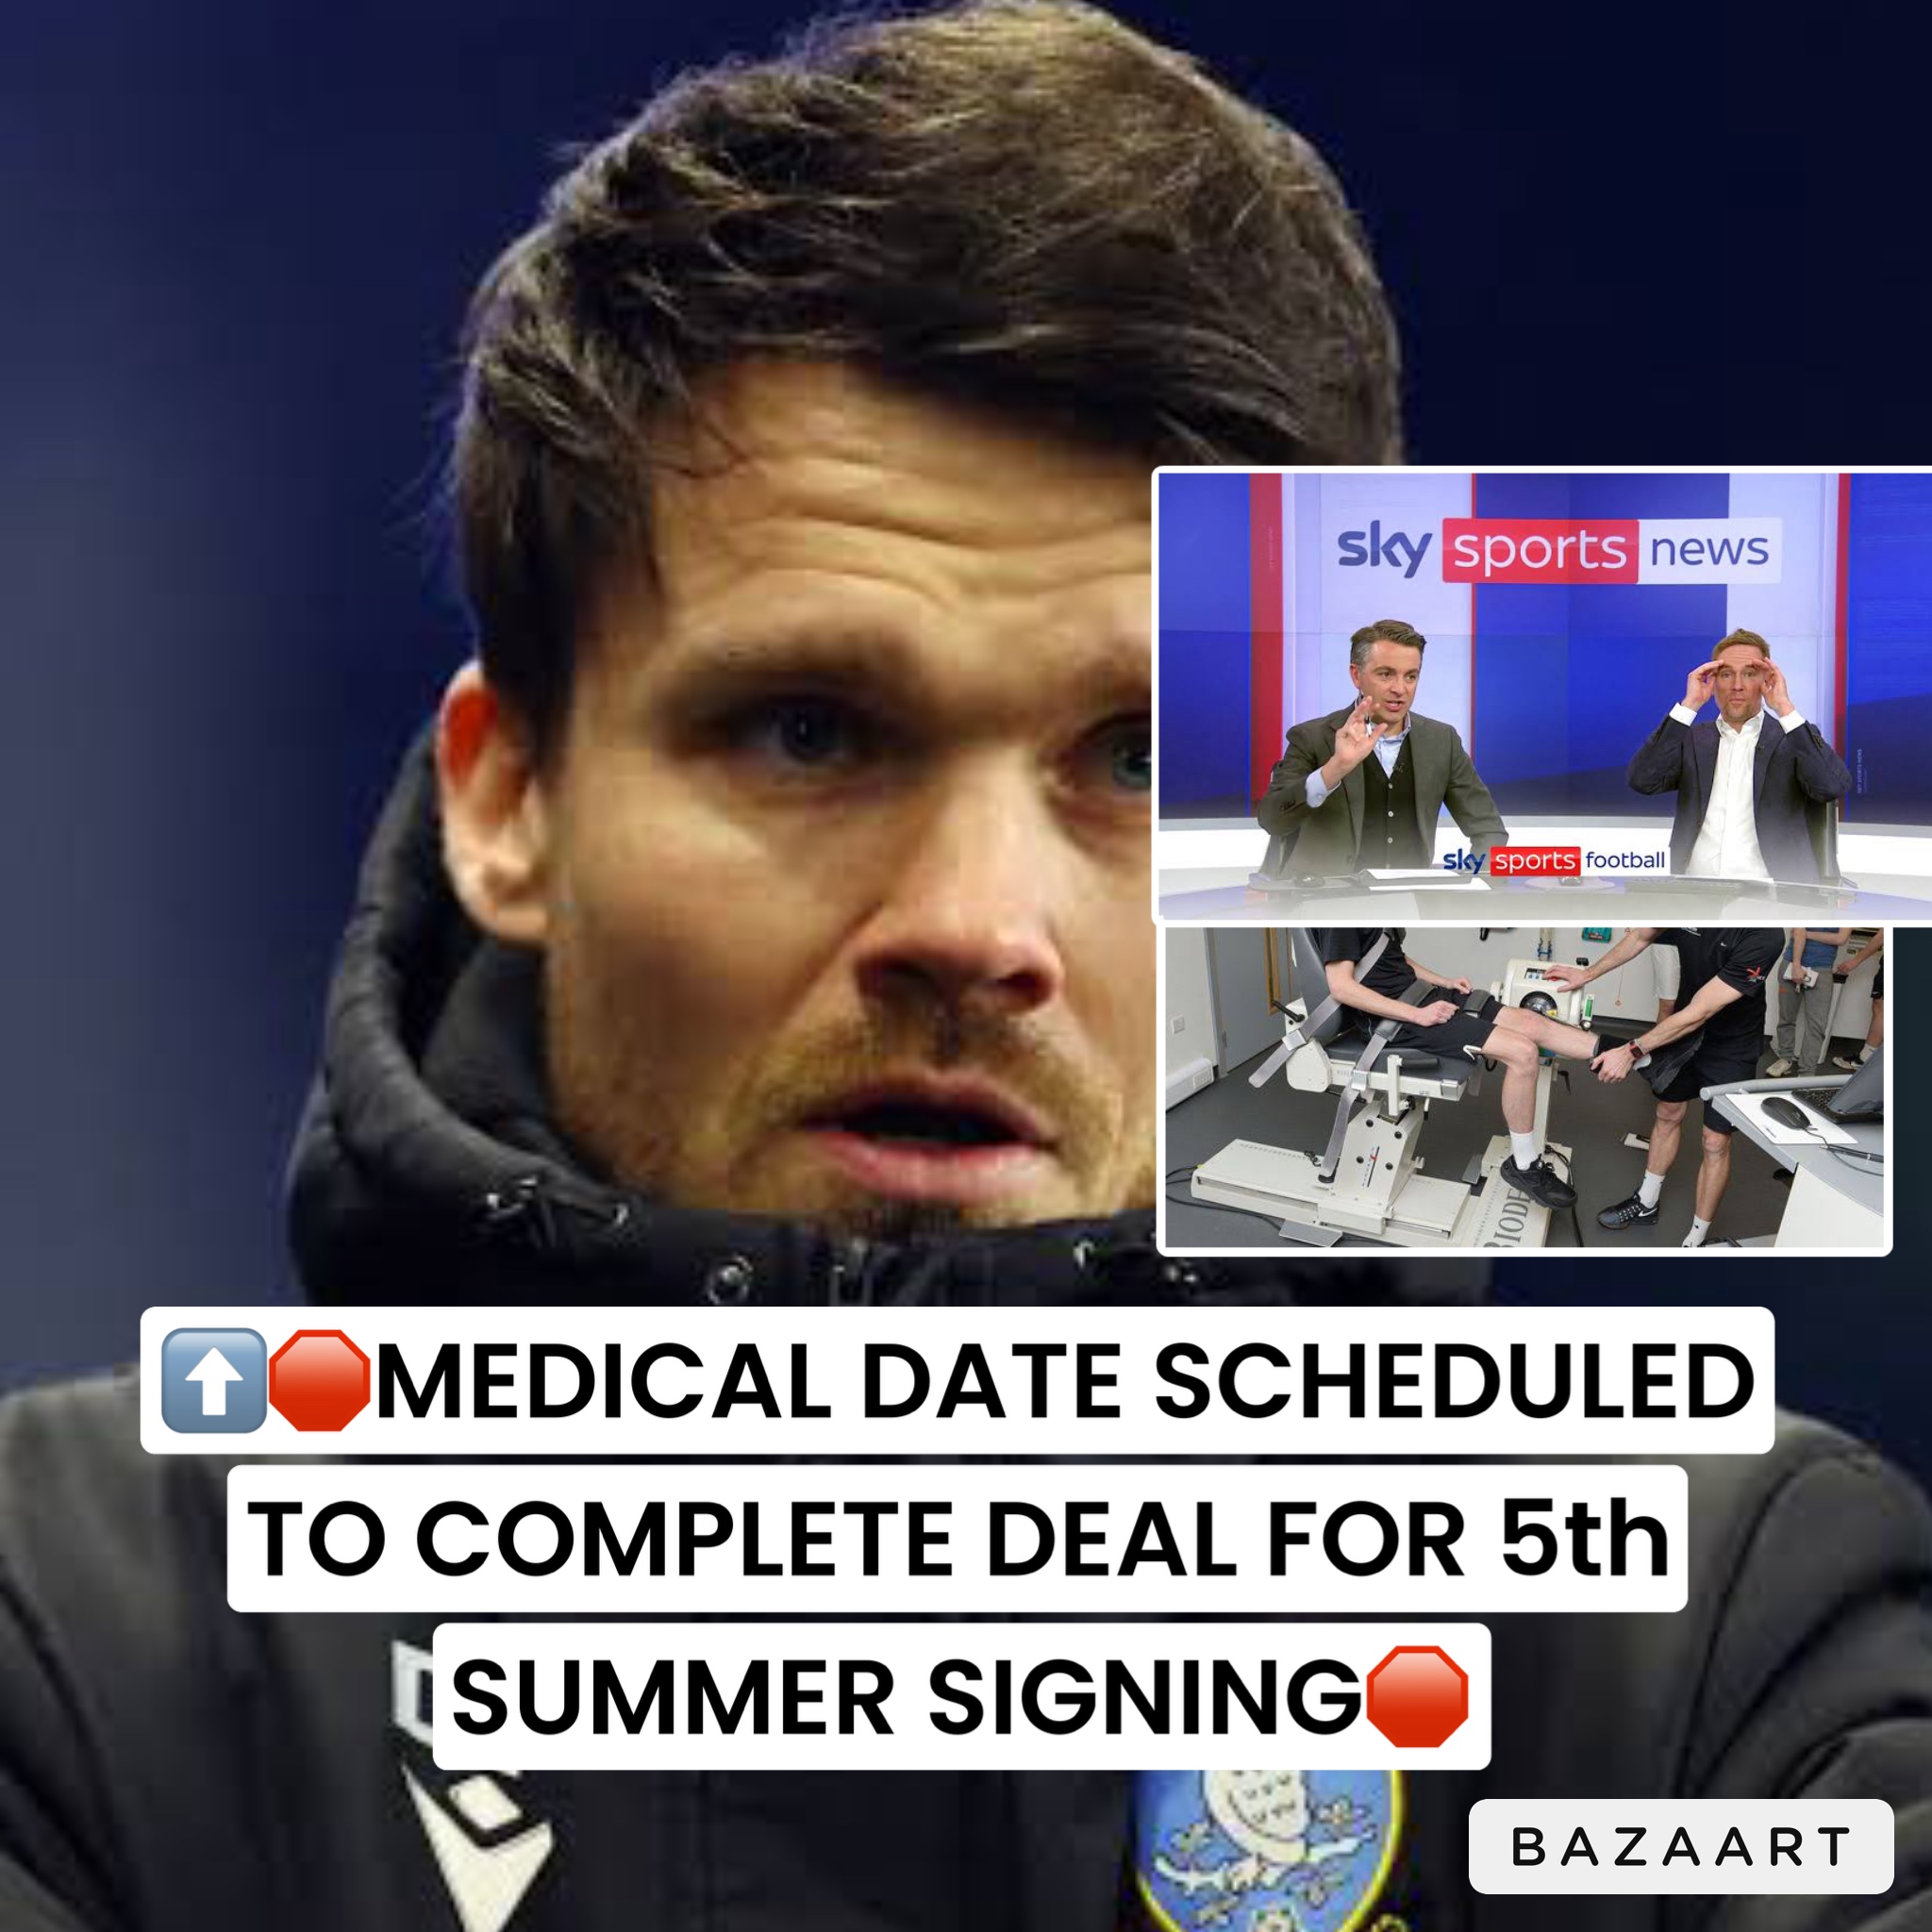 You are currently viewing MEDICAL DATE SCHEDULED TO COMPLETE DEAL FOR 5th SUMMER SIGNING